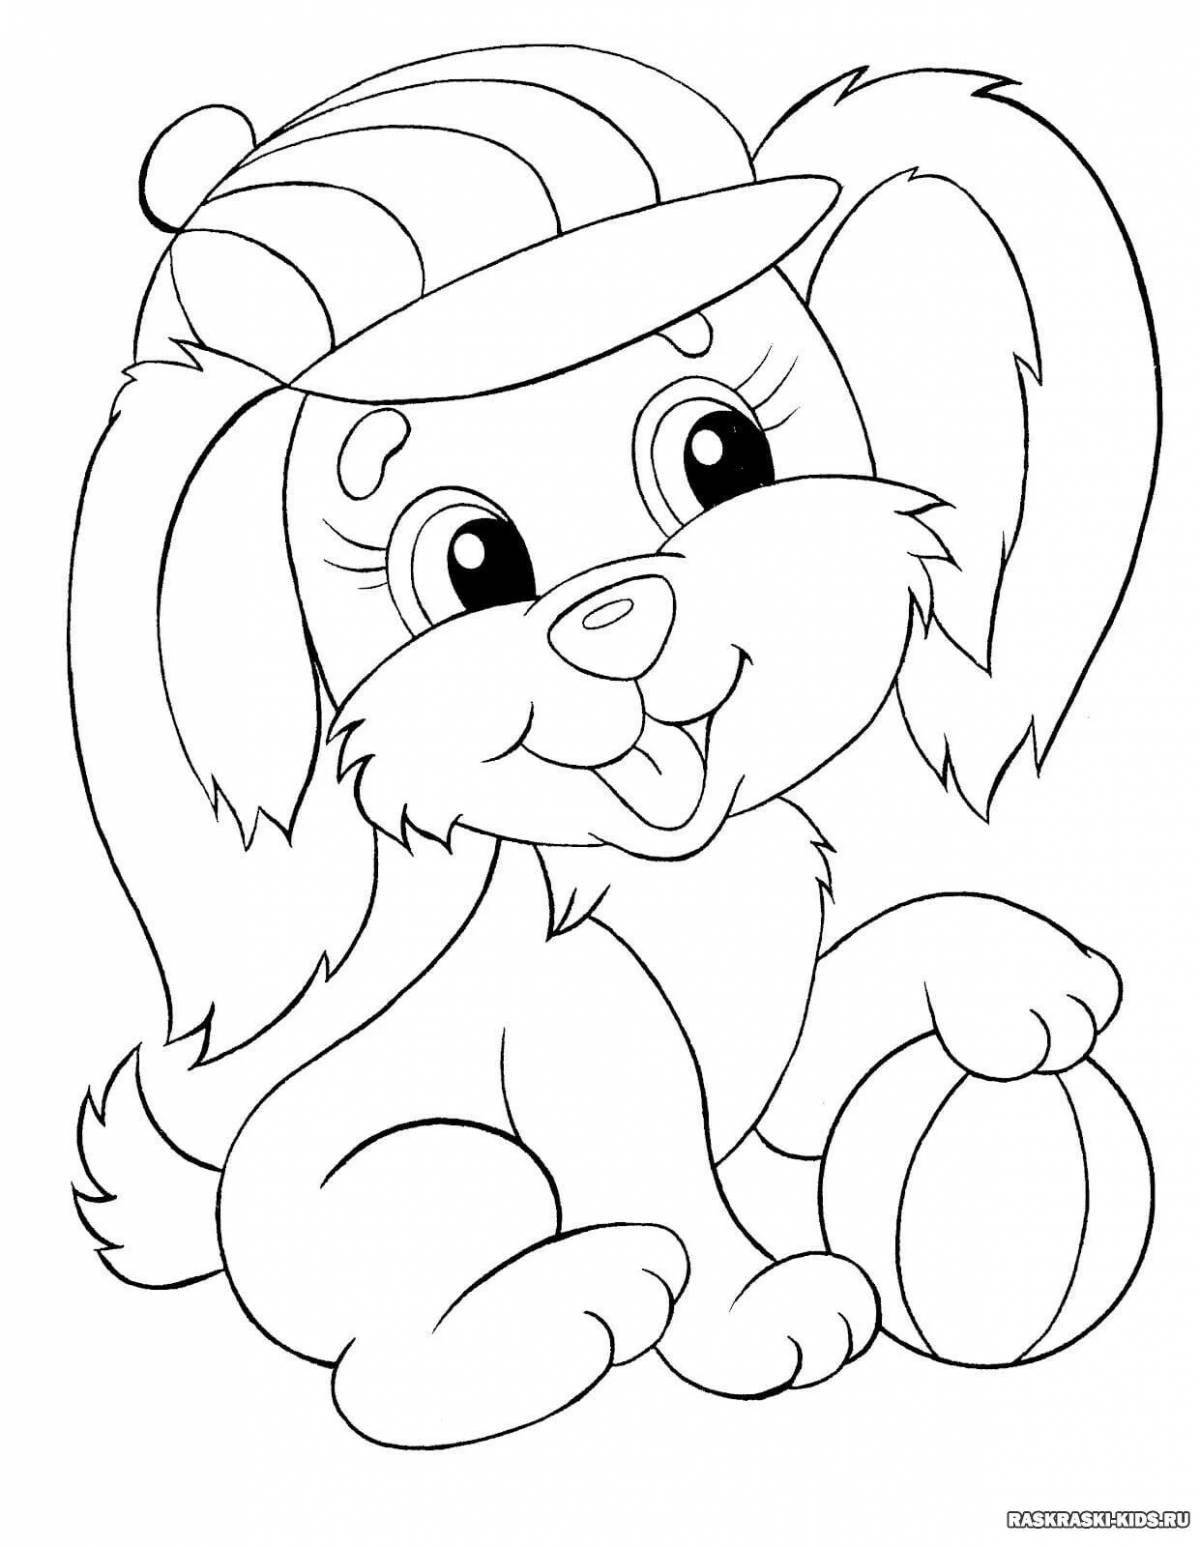 Amazing coloring pages for children 5-6 years old for girls animals